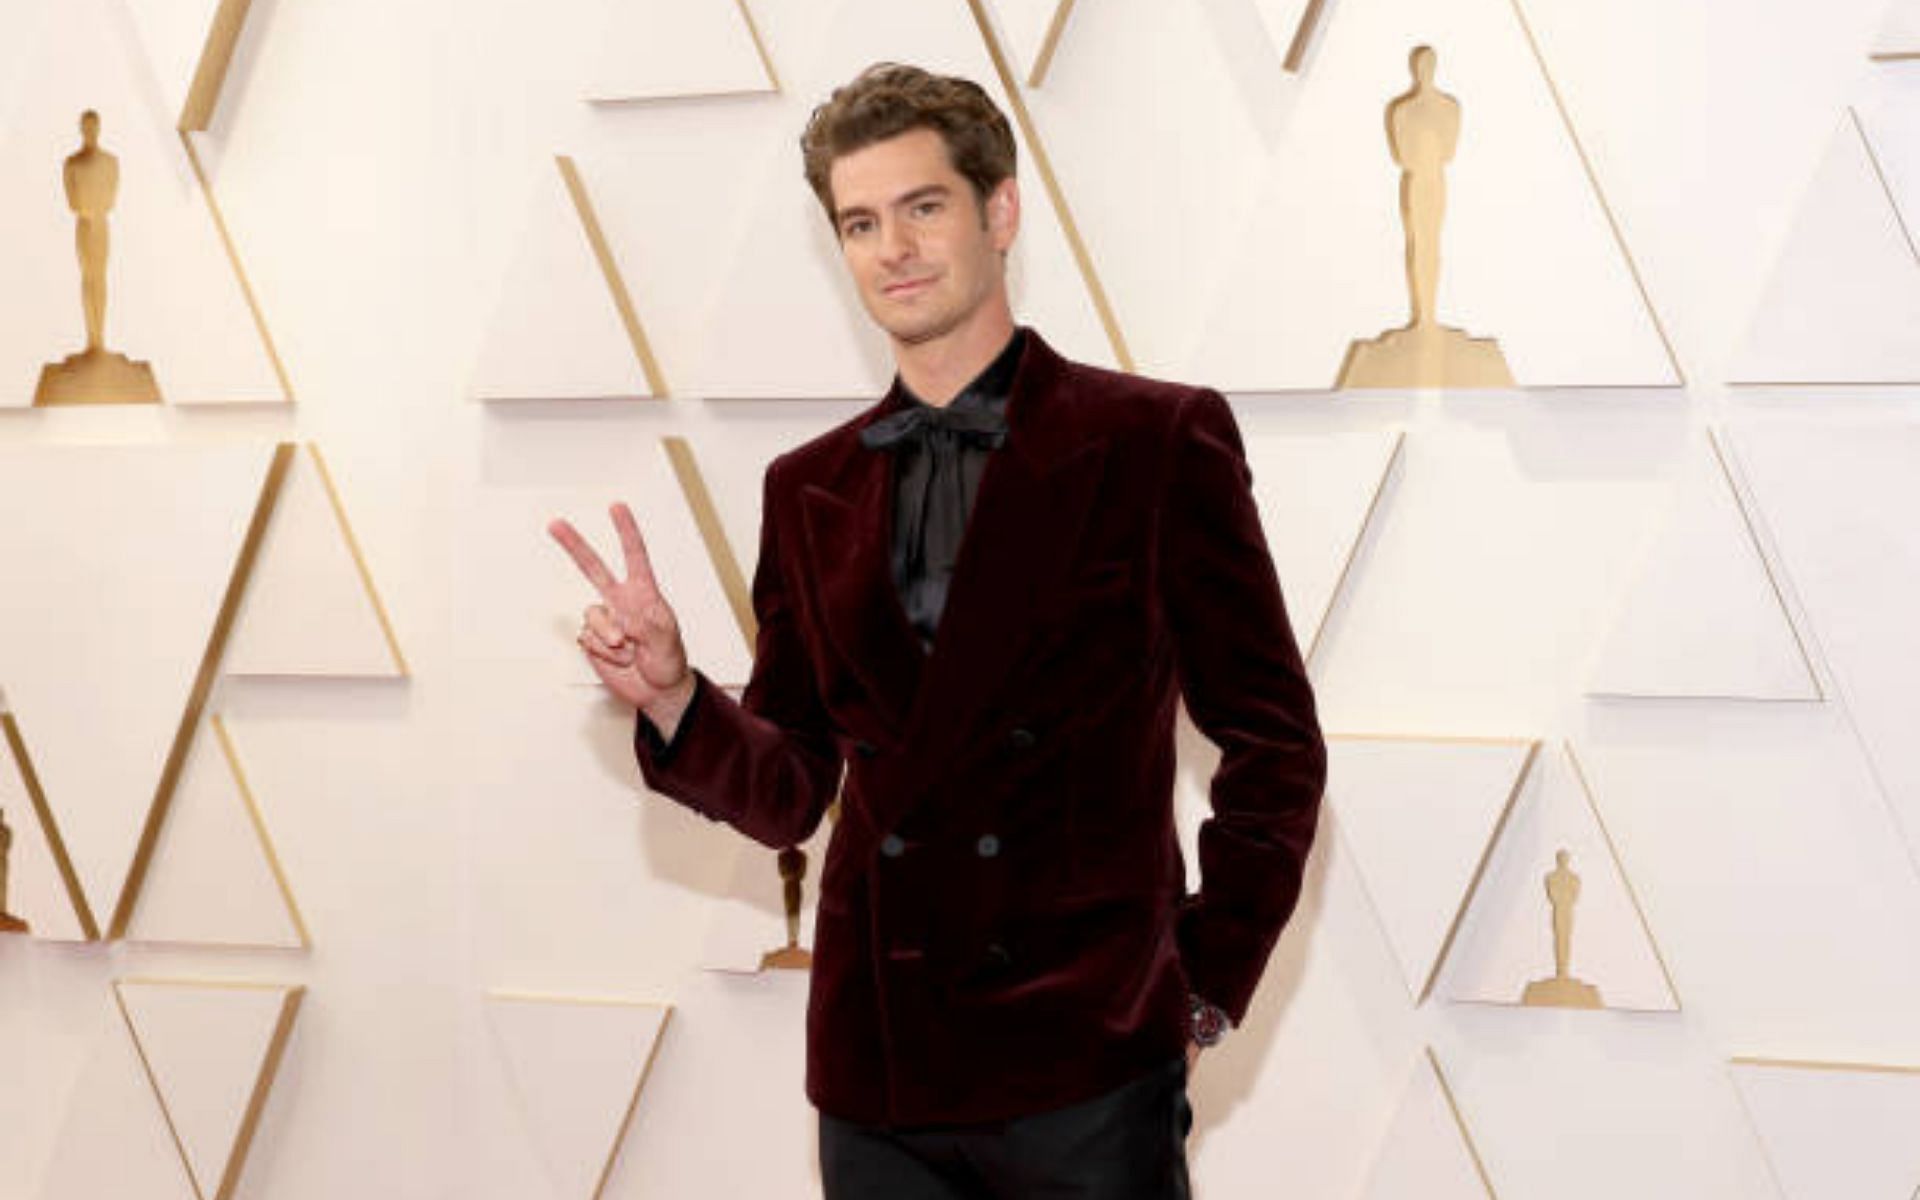 Andrew Garfield at the 94th Academy Awards (Image via Getty Images)